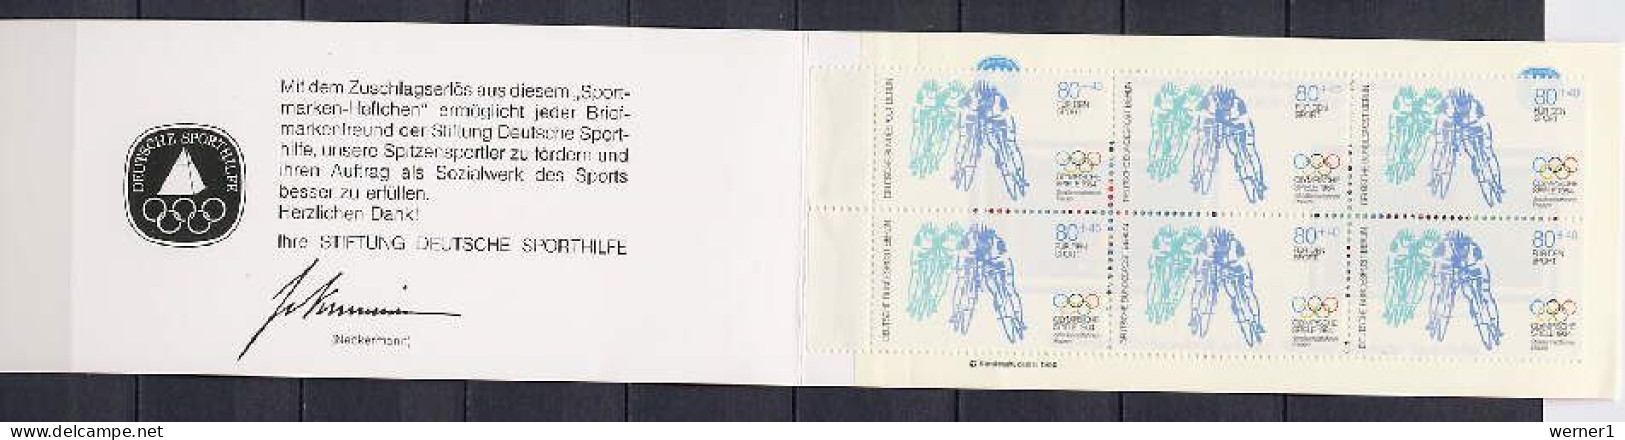 Germany - Berlin 1984 Olympic Games Los Angeles, Cycling Stamp Booklet With 6 Stamps + Vignette MNH - Sommer 1984: Los Angeles